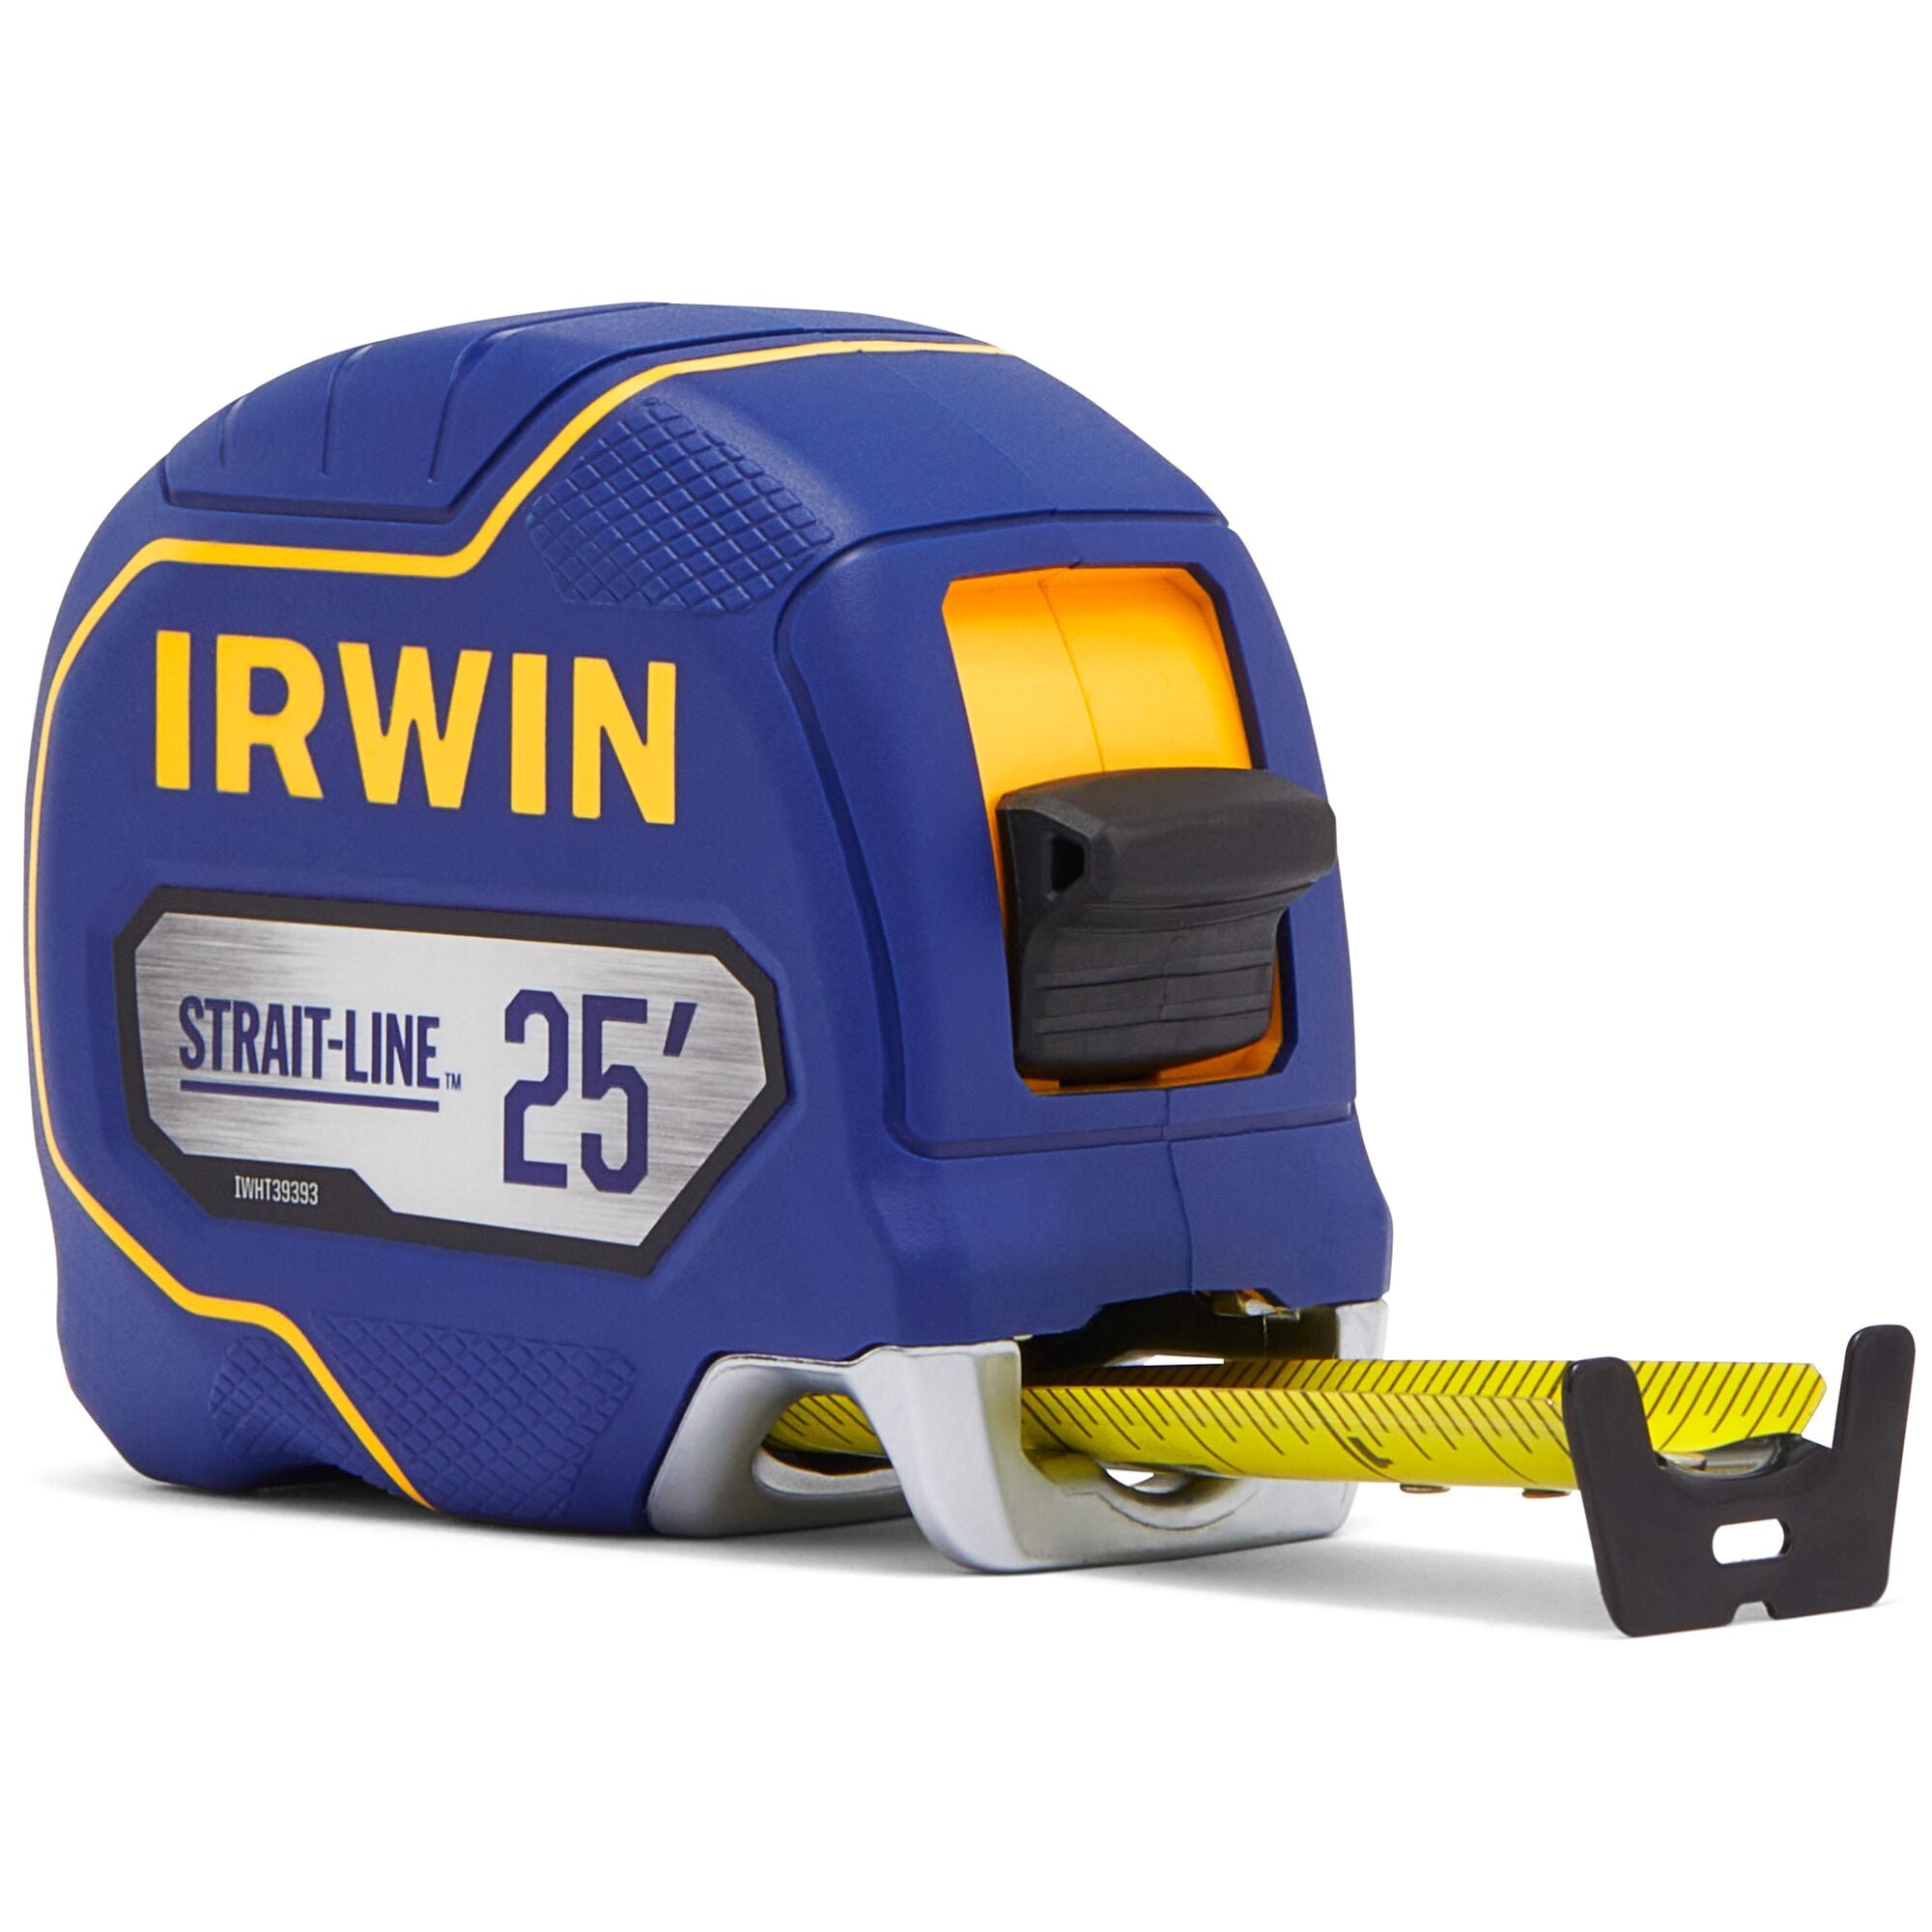 Allwin Tape Measure 25 ft - Metal Retractable Tape Measure with Fractions, Easy Read Steel Tape Measure, 1-Inch Wide x 25 Foot